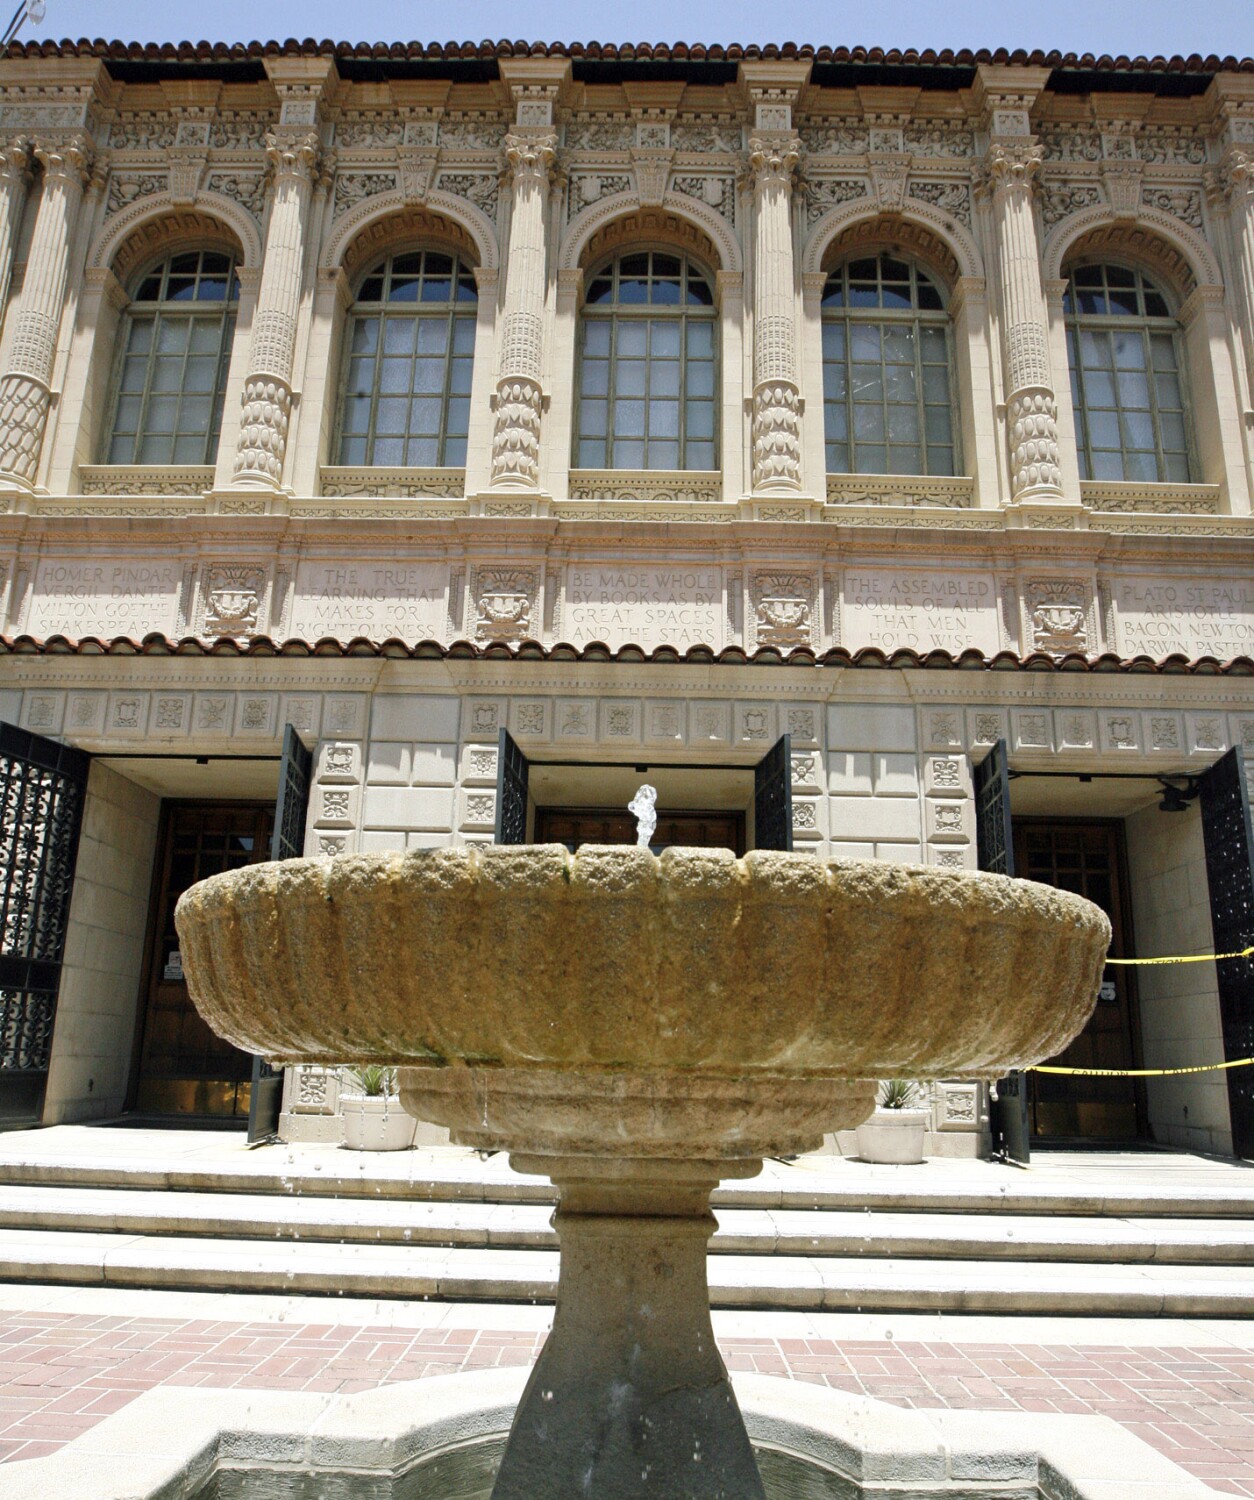 Pasadena Central Library closes due to seismic safety issues